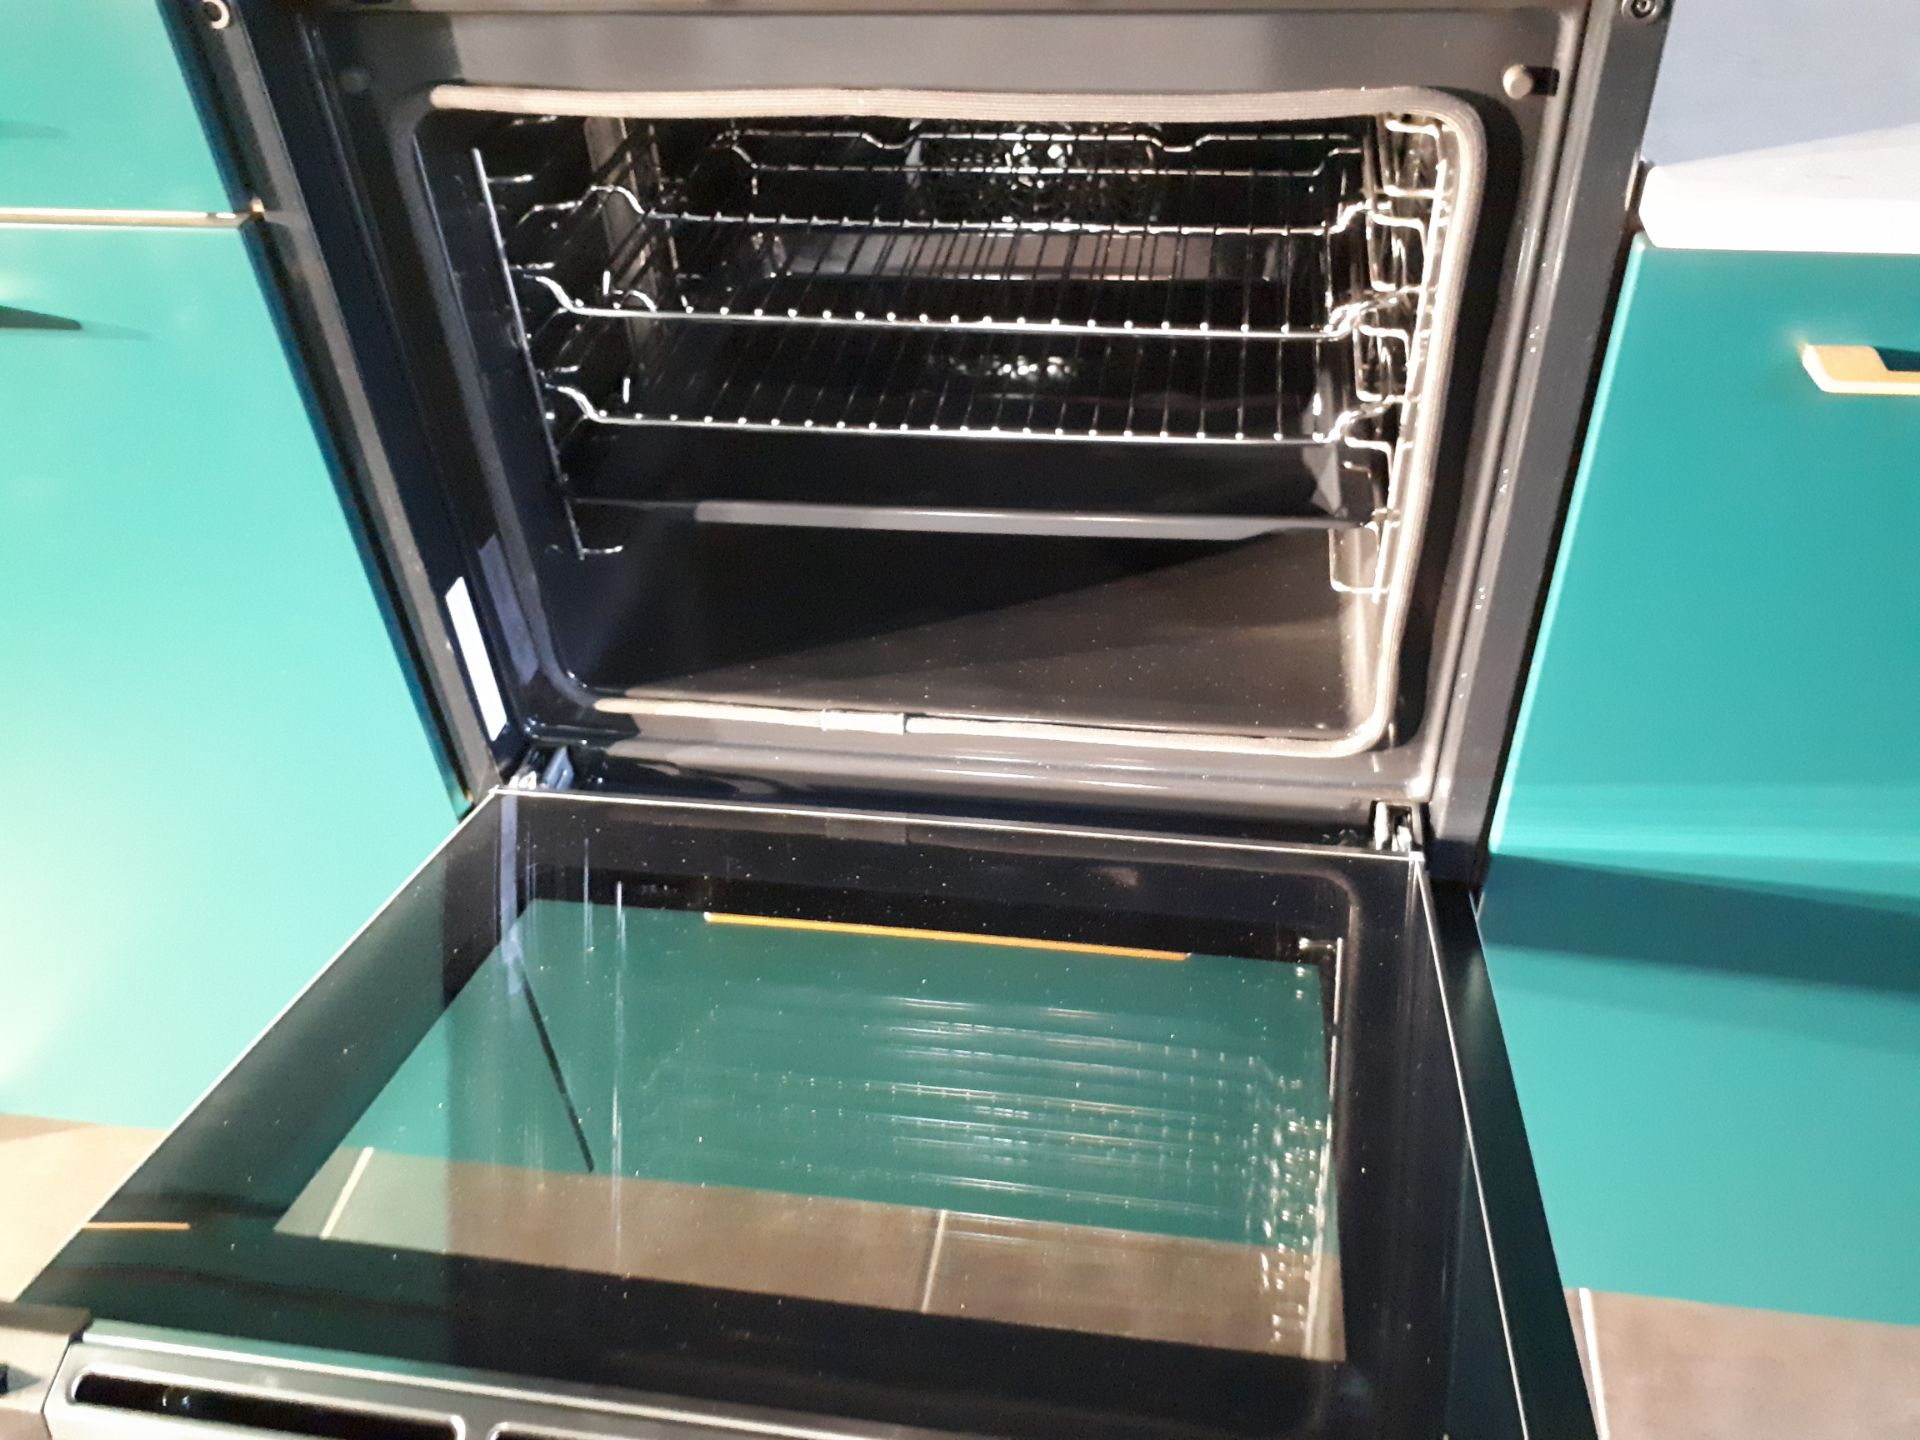 Siemens HB878GBB6B Built In Electric Single Oven - Image 3 of 3